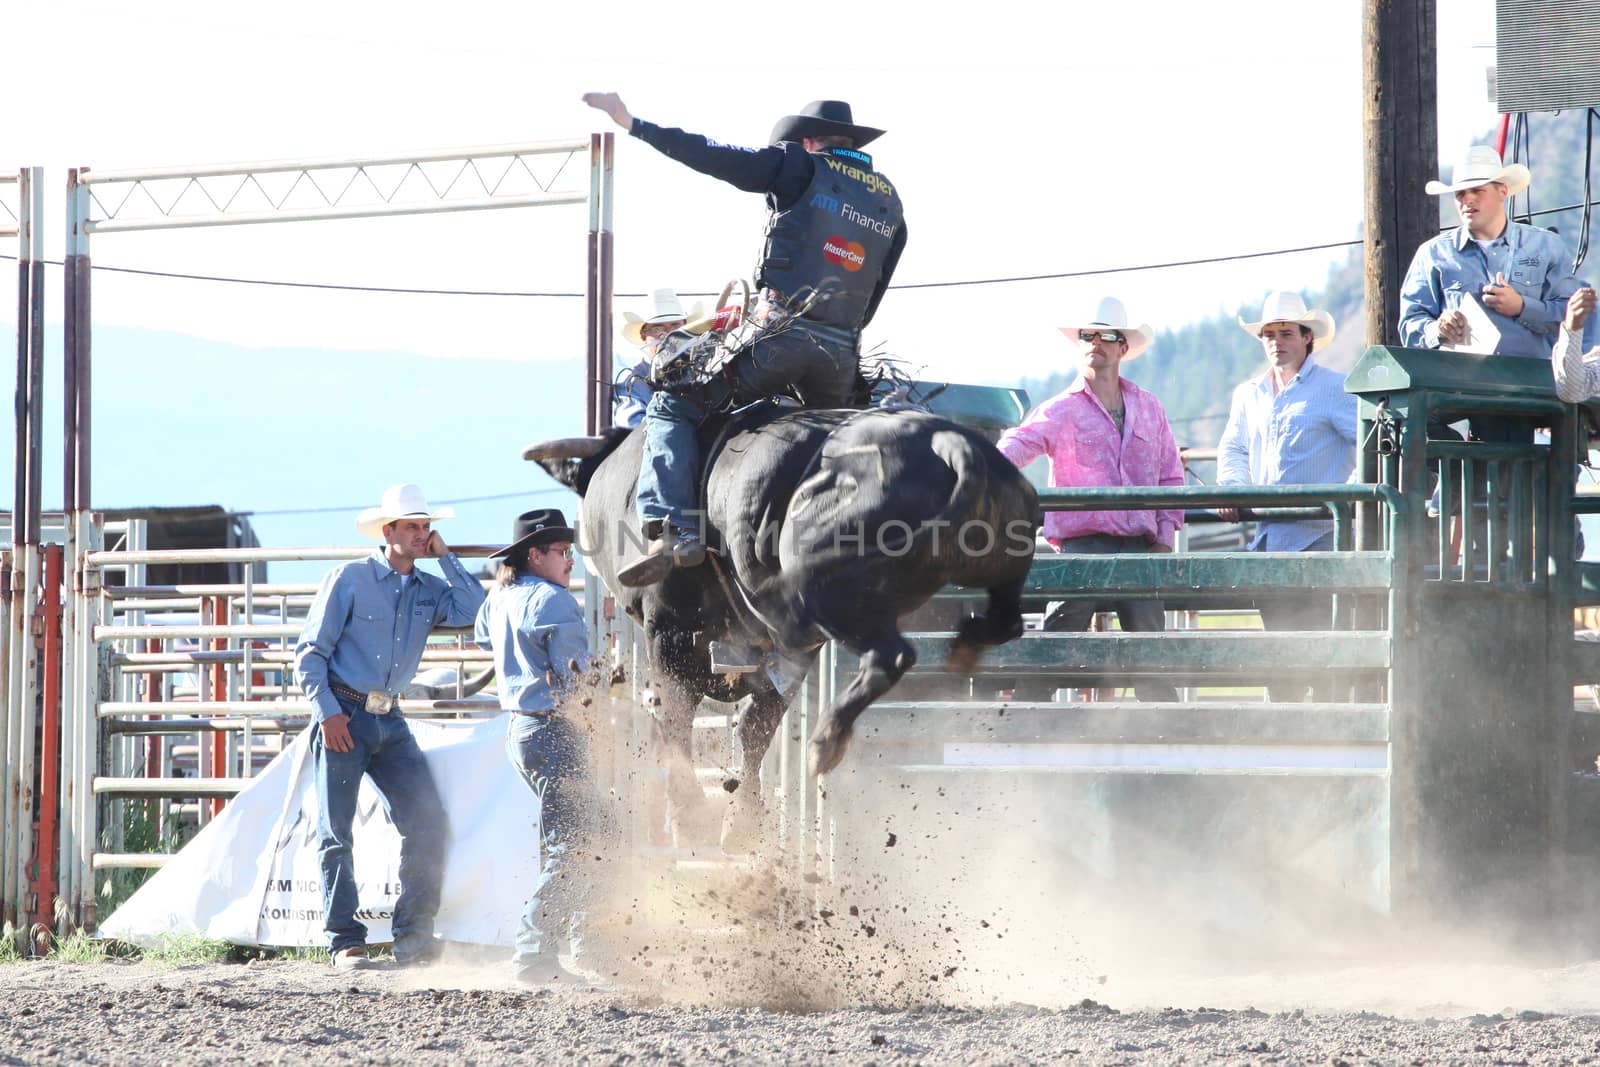 Ty Pozzobon Invitational PBR by vanell